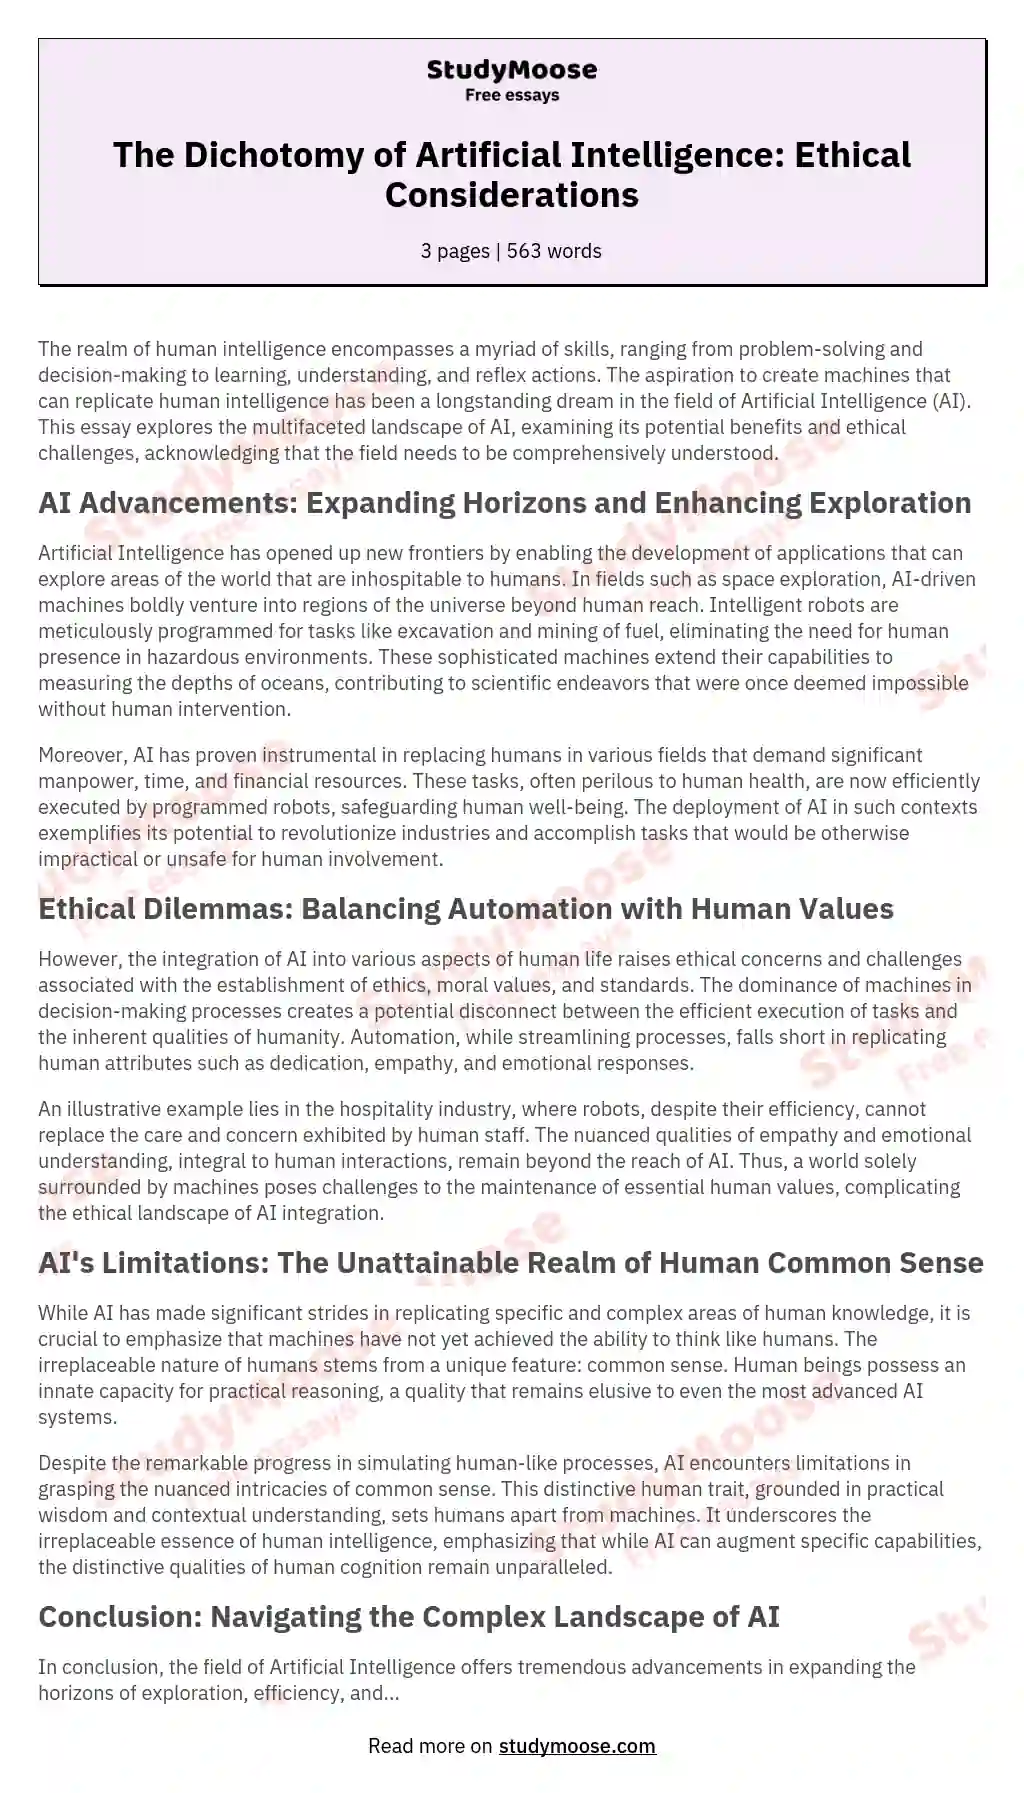 The Dichotomy of Artificial Intelligence: Ethical Considerations essay